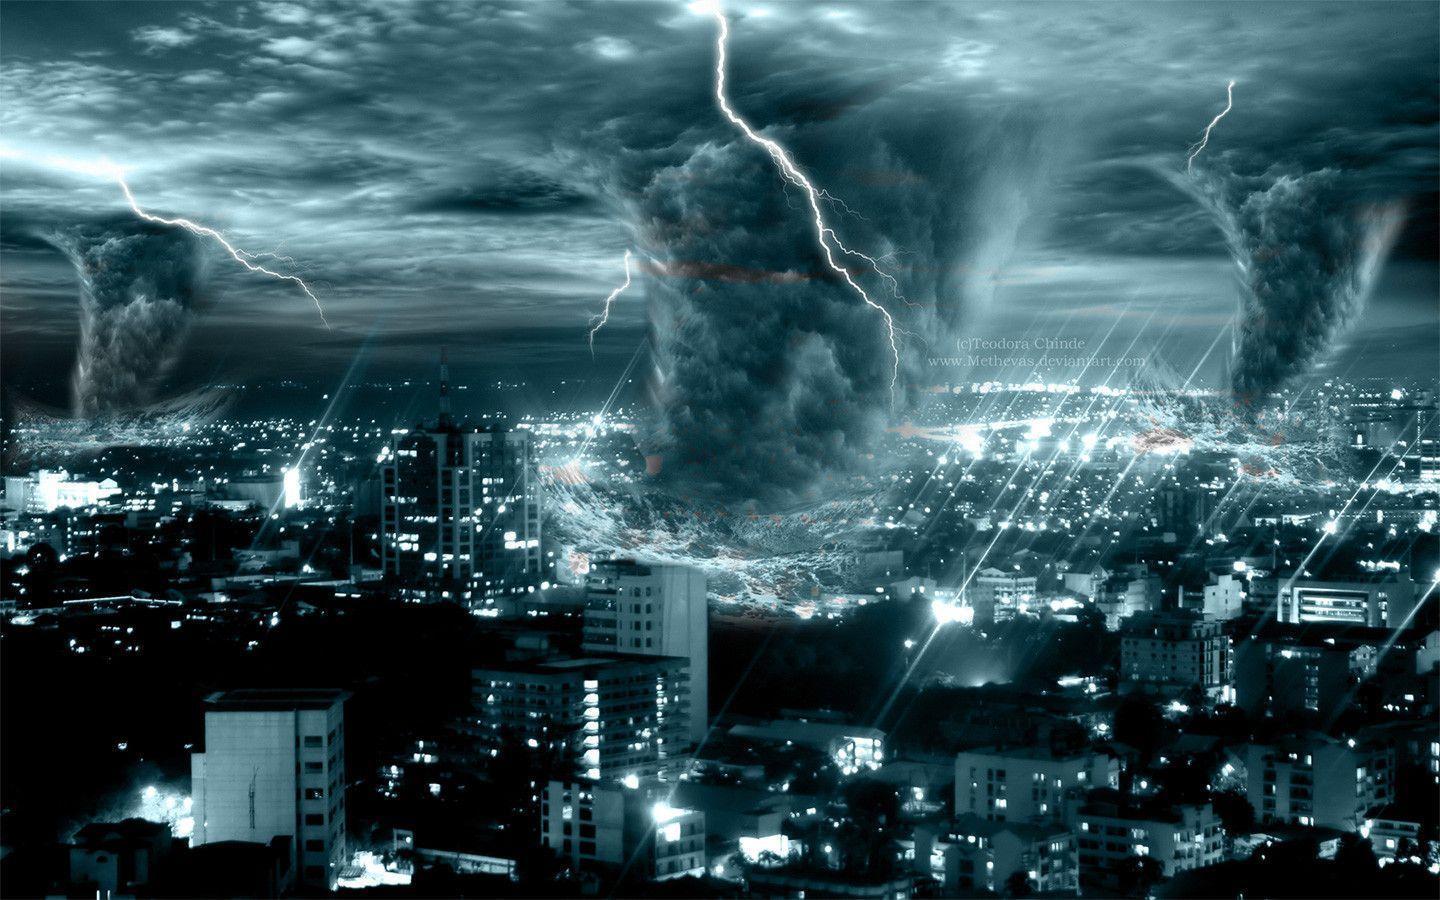 thunderstorm wallpaper 8 - Image And Wallpaper free to